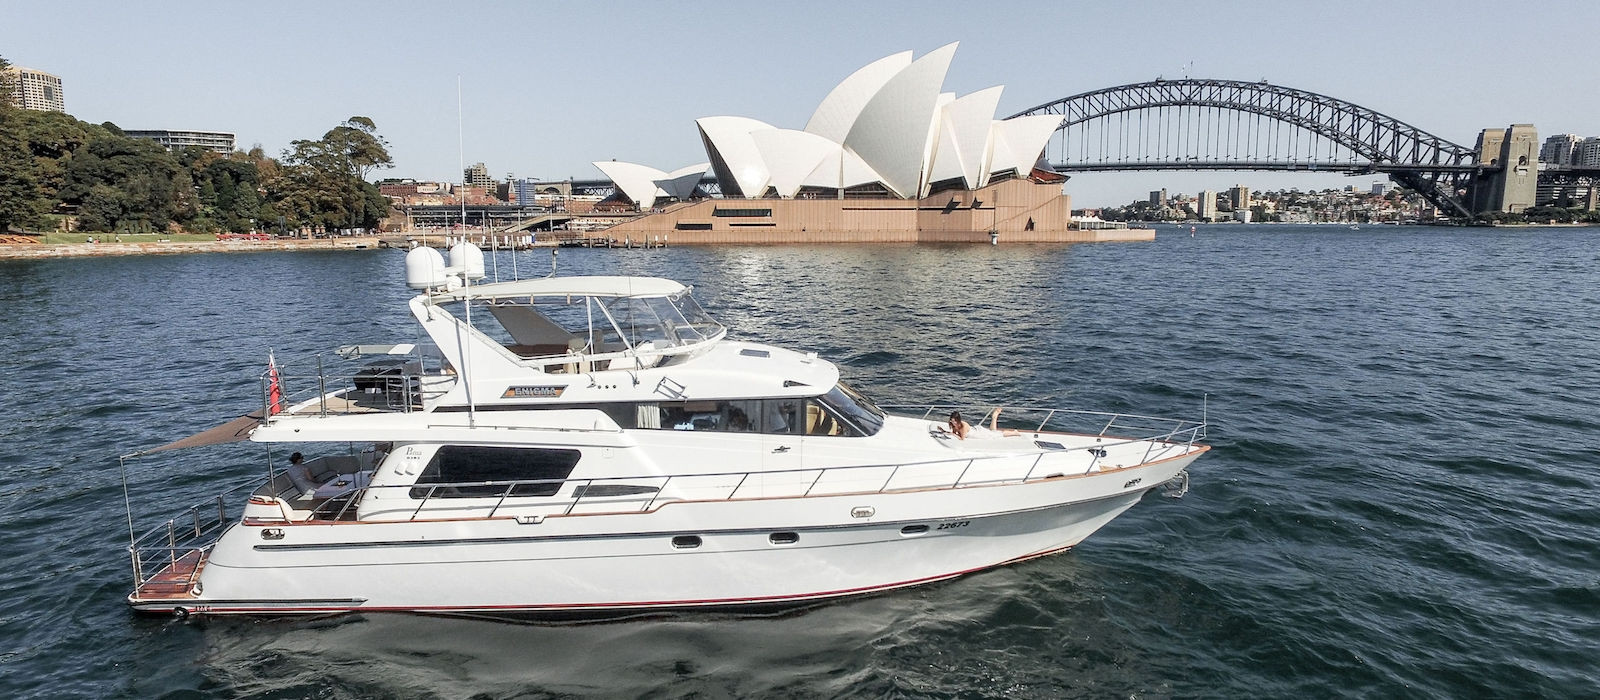 Enigma luxury boat hire with Opera House background